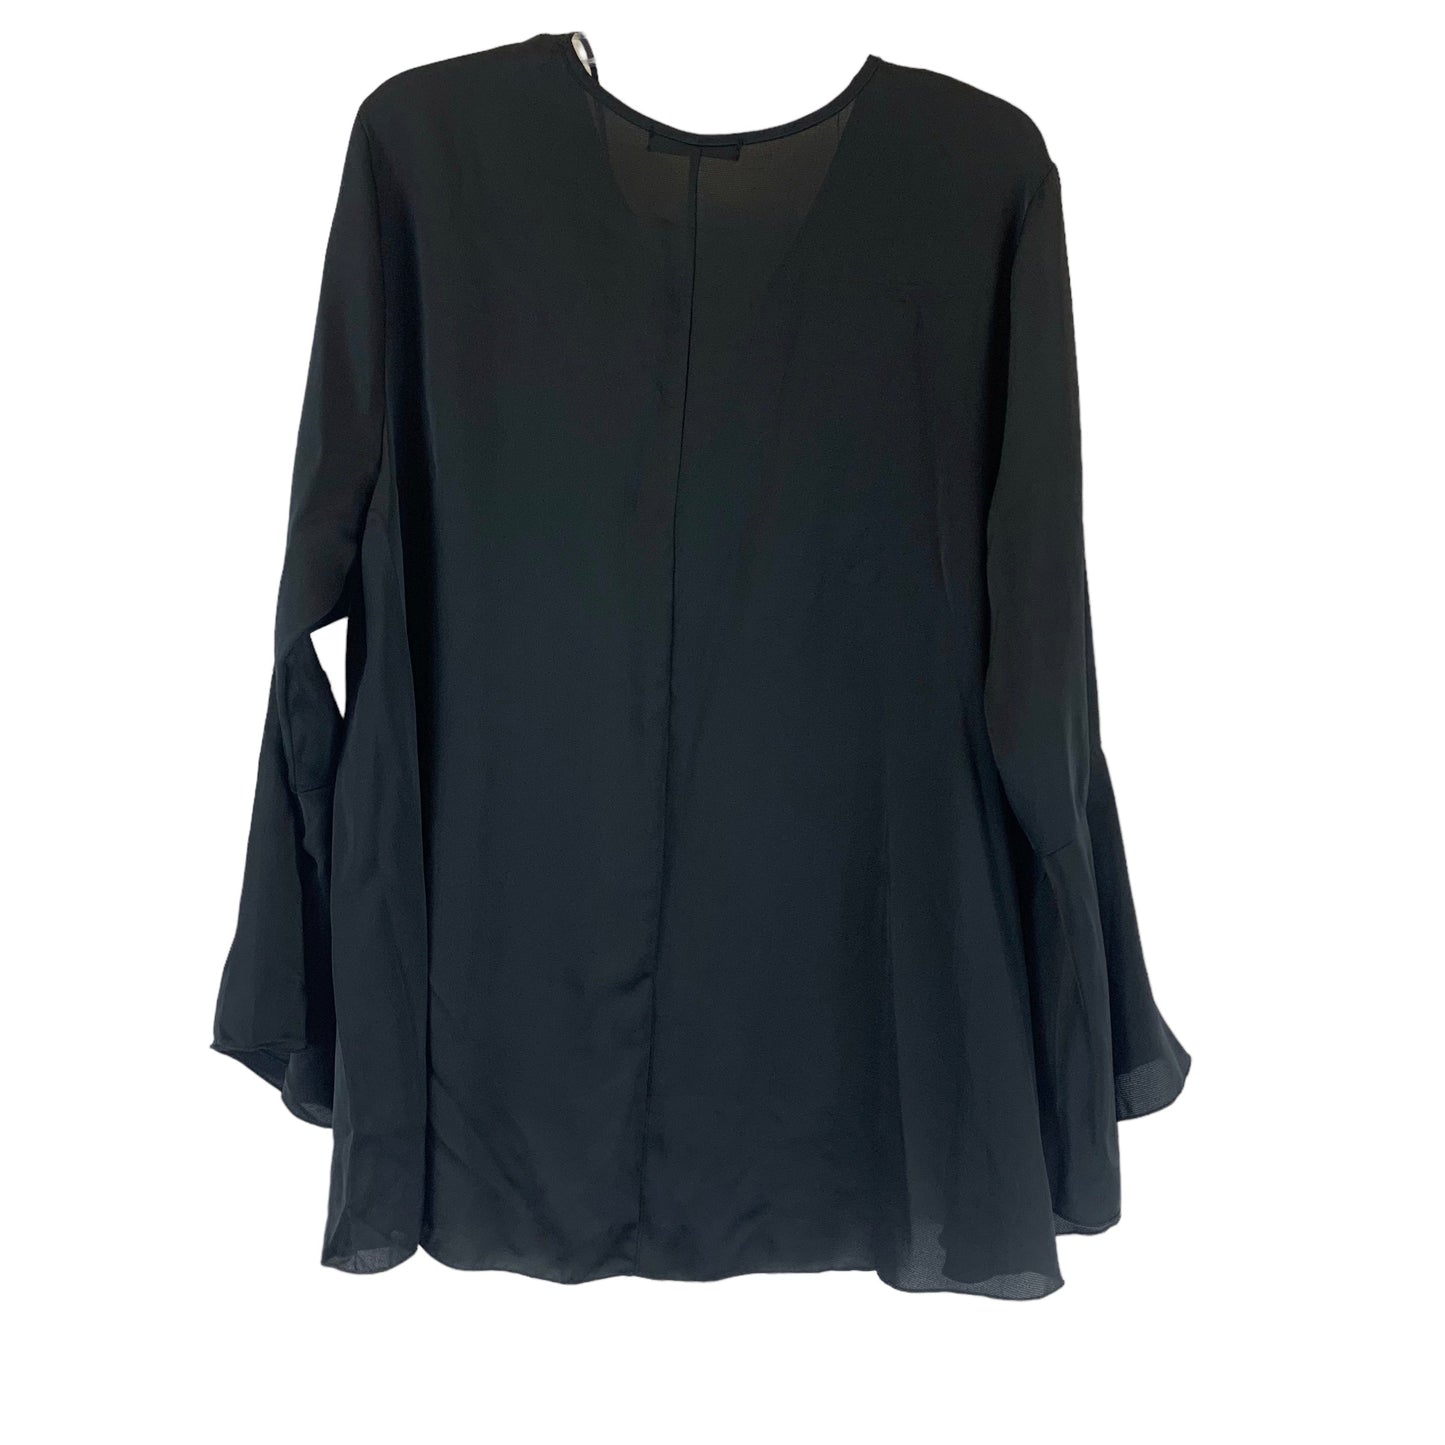 Top Long Sleeve By Kim & Cami  Size: 1x